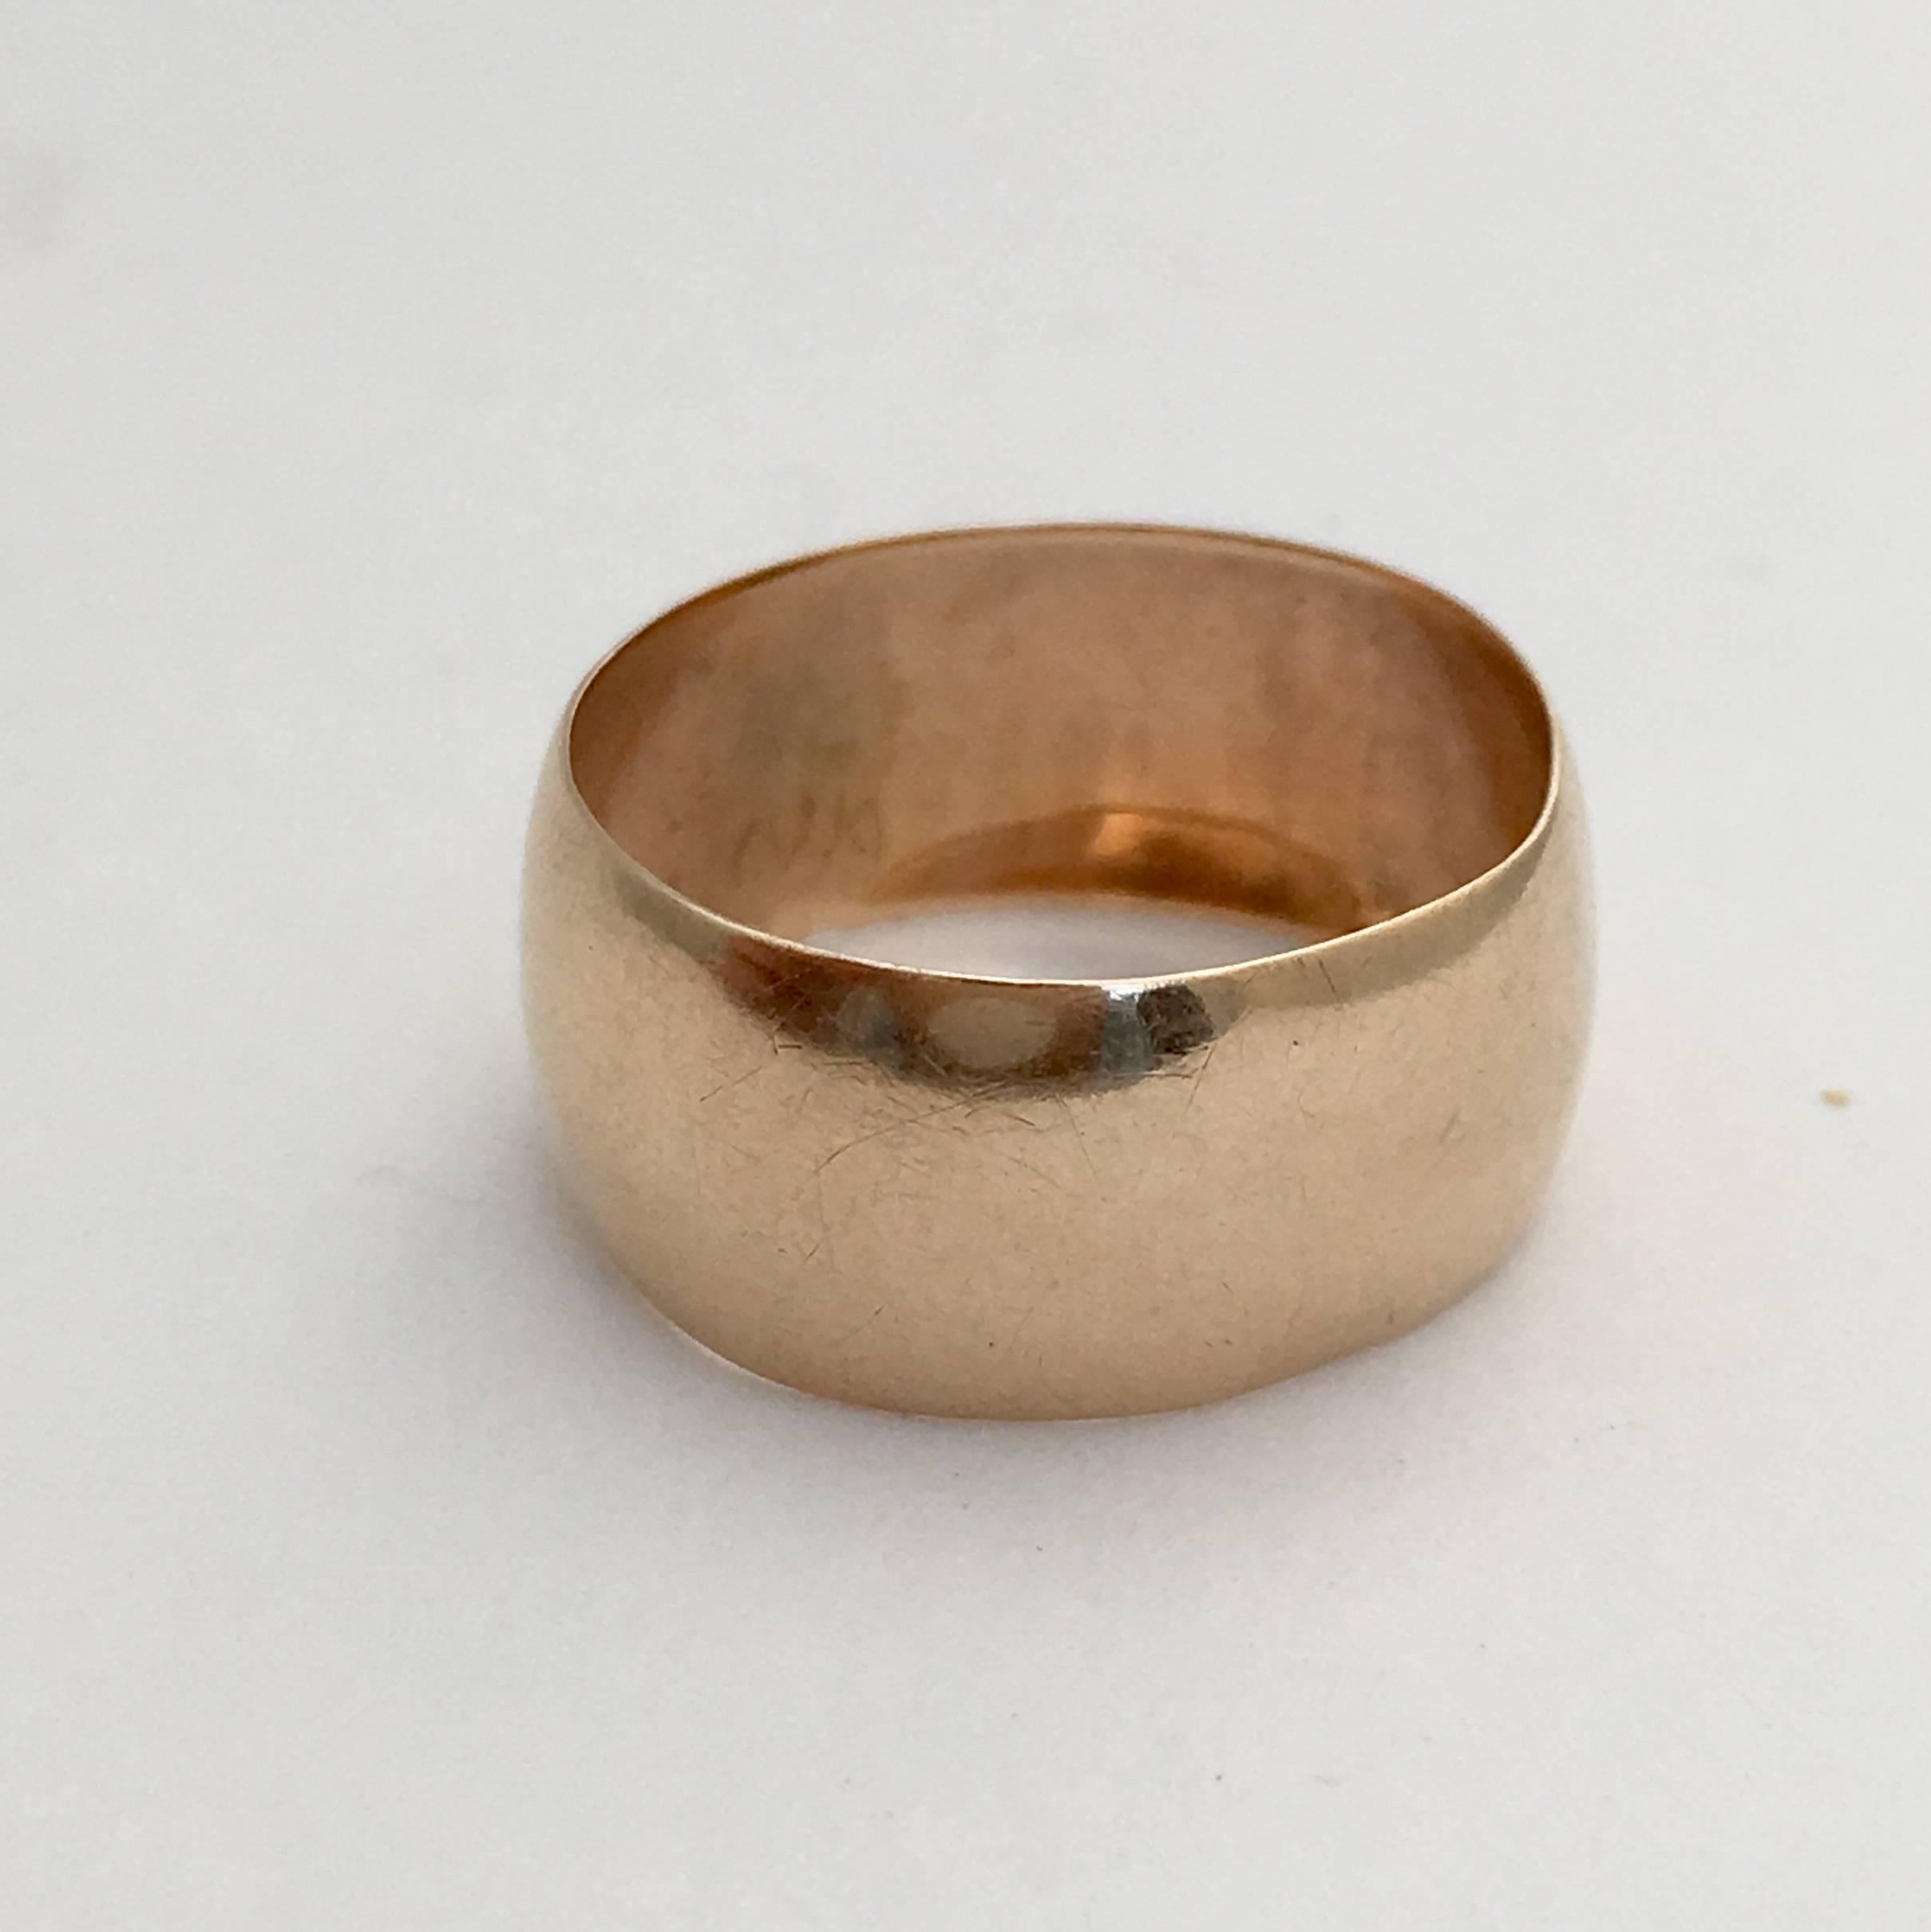 Romantic 1920s Wedding Band Rose Gold Plain Wide Stacking Ring Chester Vintage Jewelry